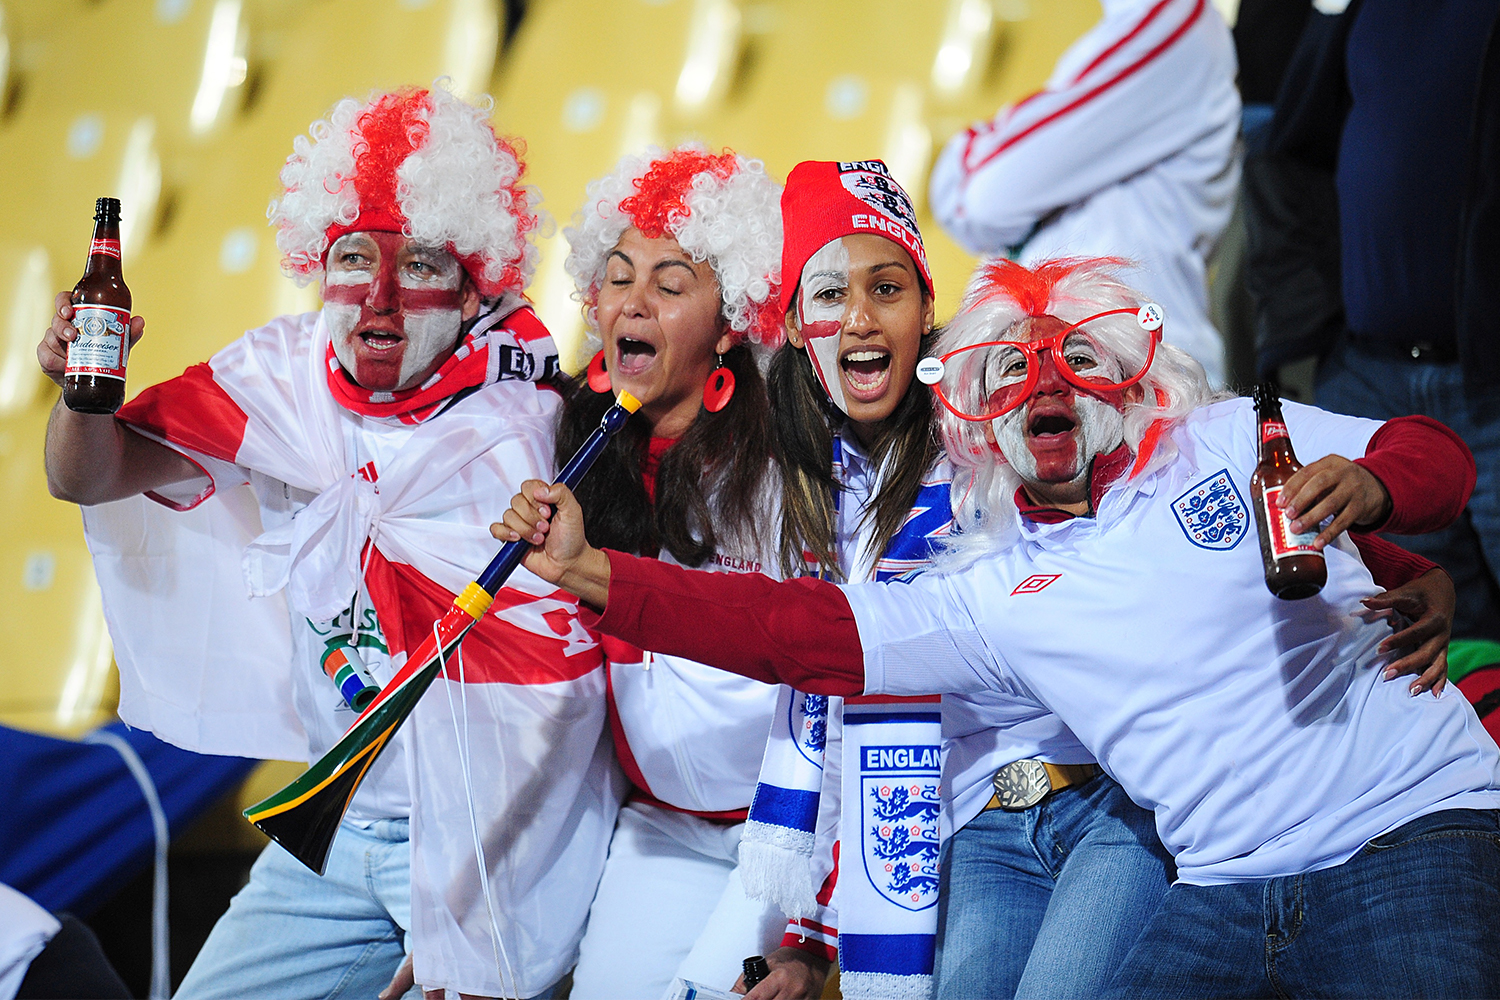 Four England fans holding beer and wearing face paint at the 2010 World Cup in South Africa. The 2022 edition in Qatar will look much different.